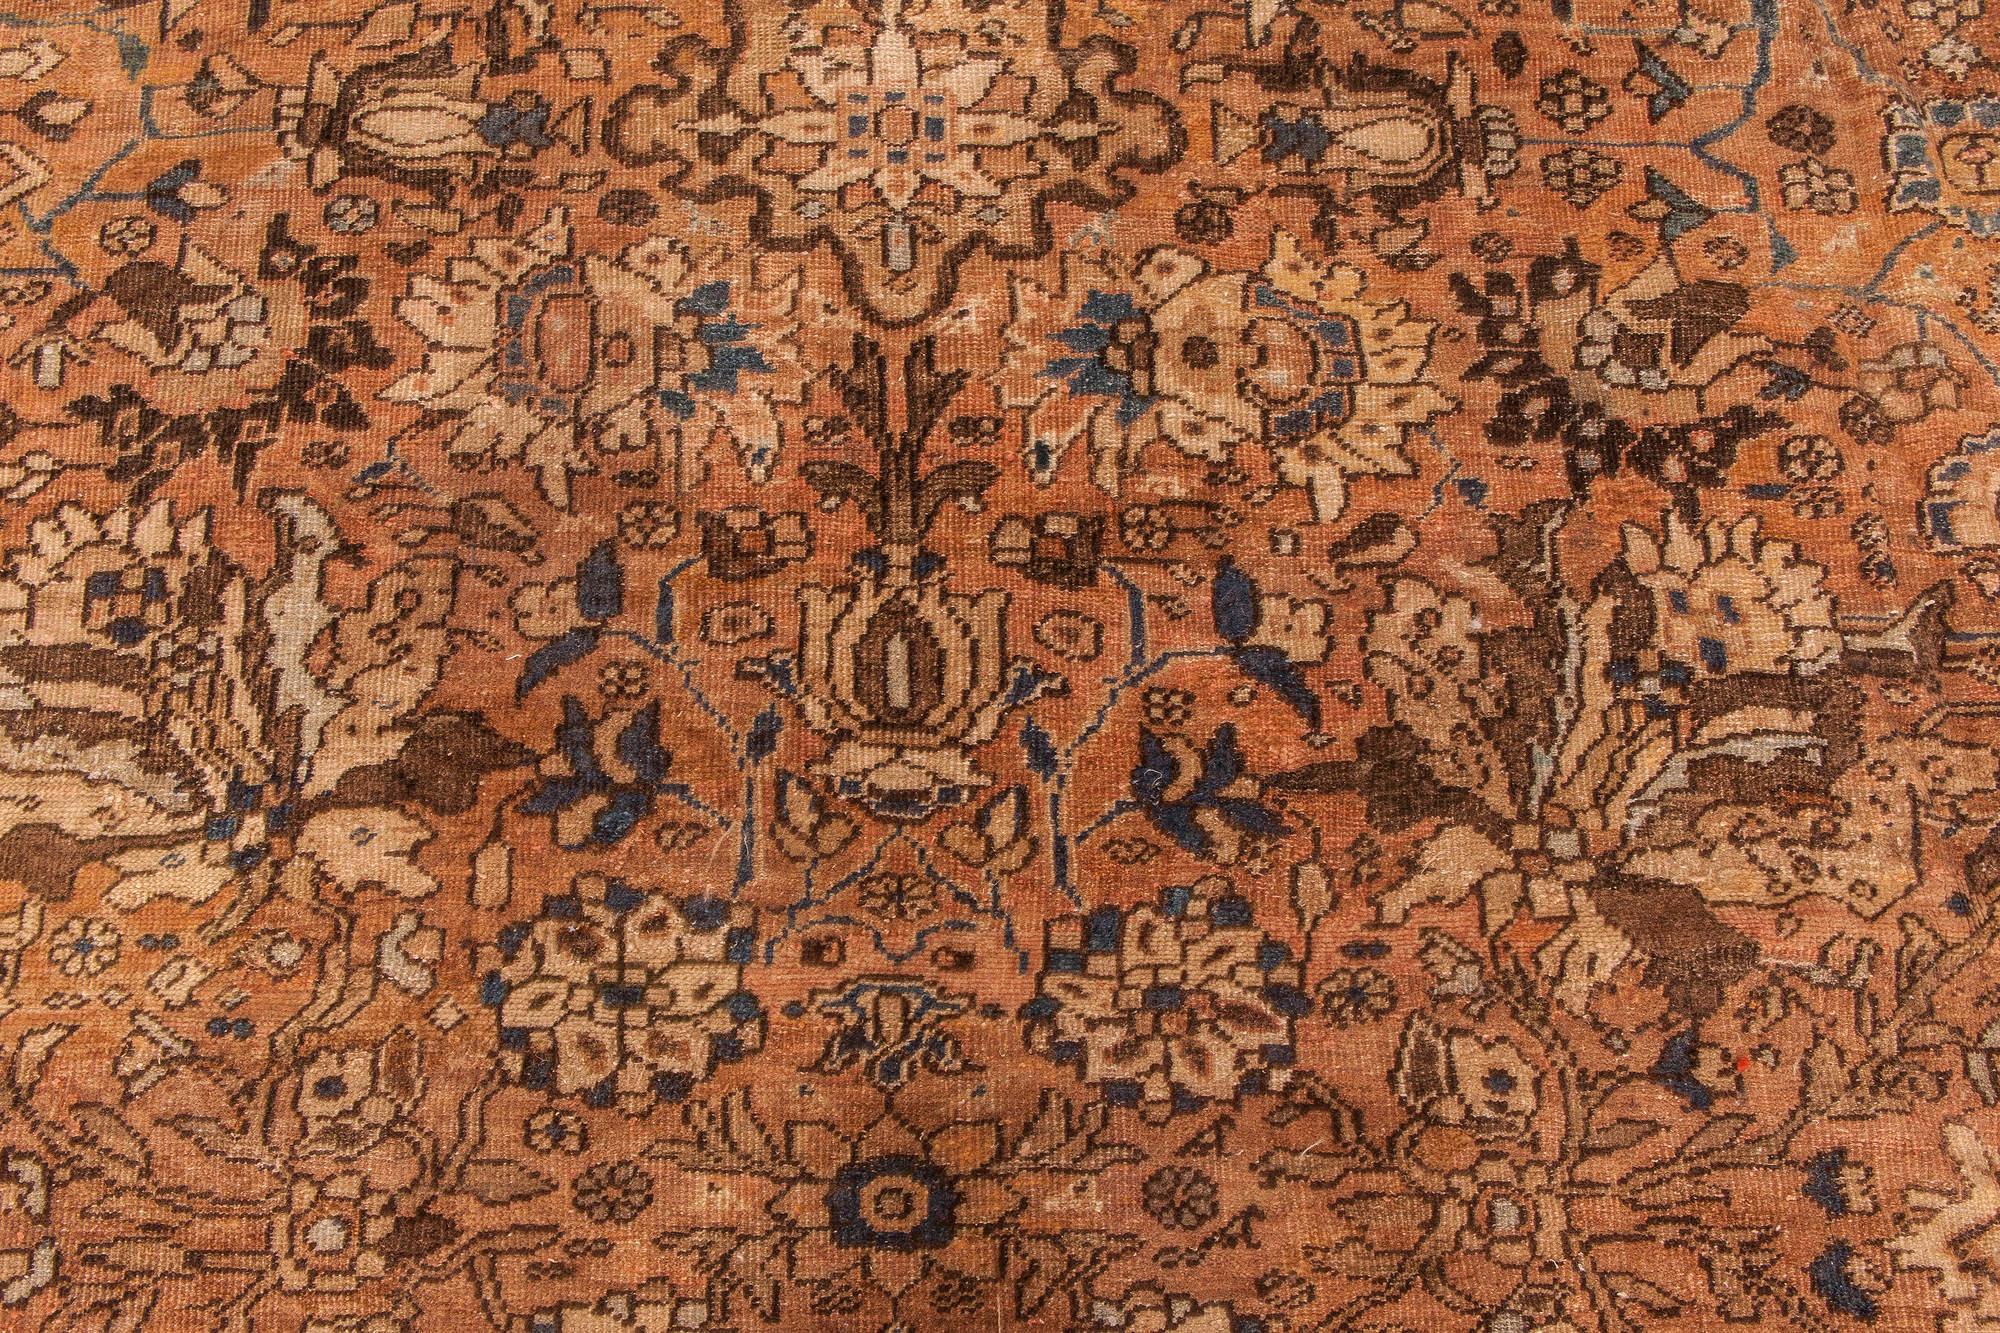 Antique Persian Sultanabad brown handwoven wool carpet
Size: 12'2